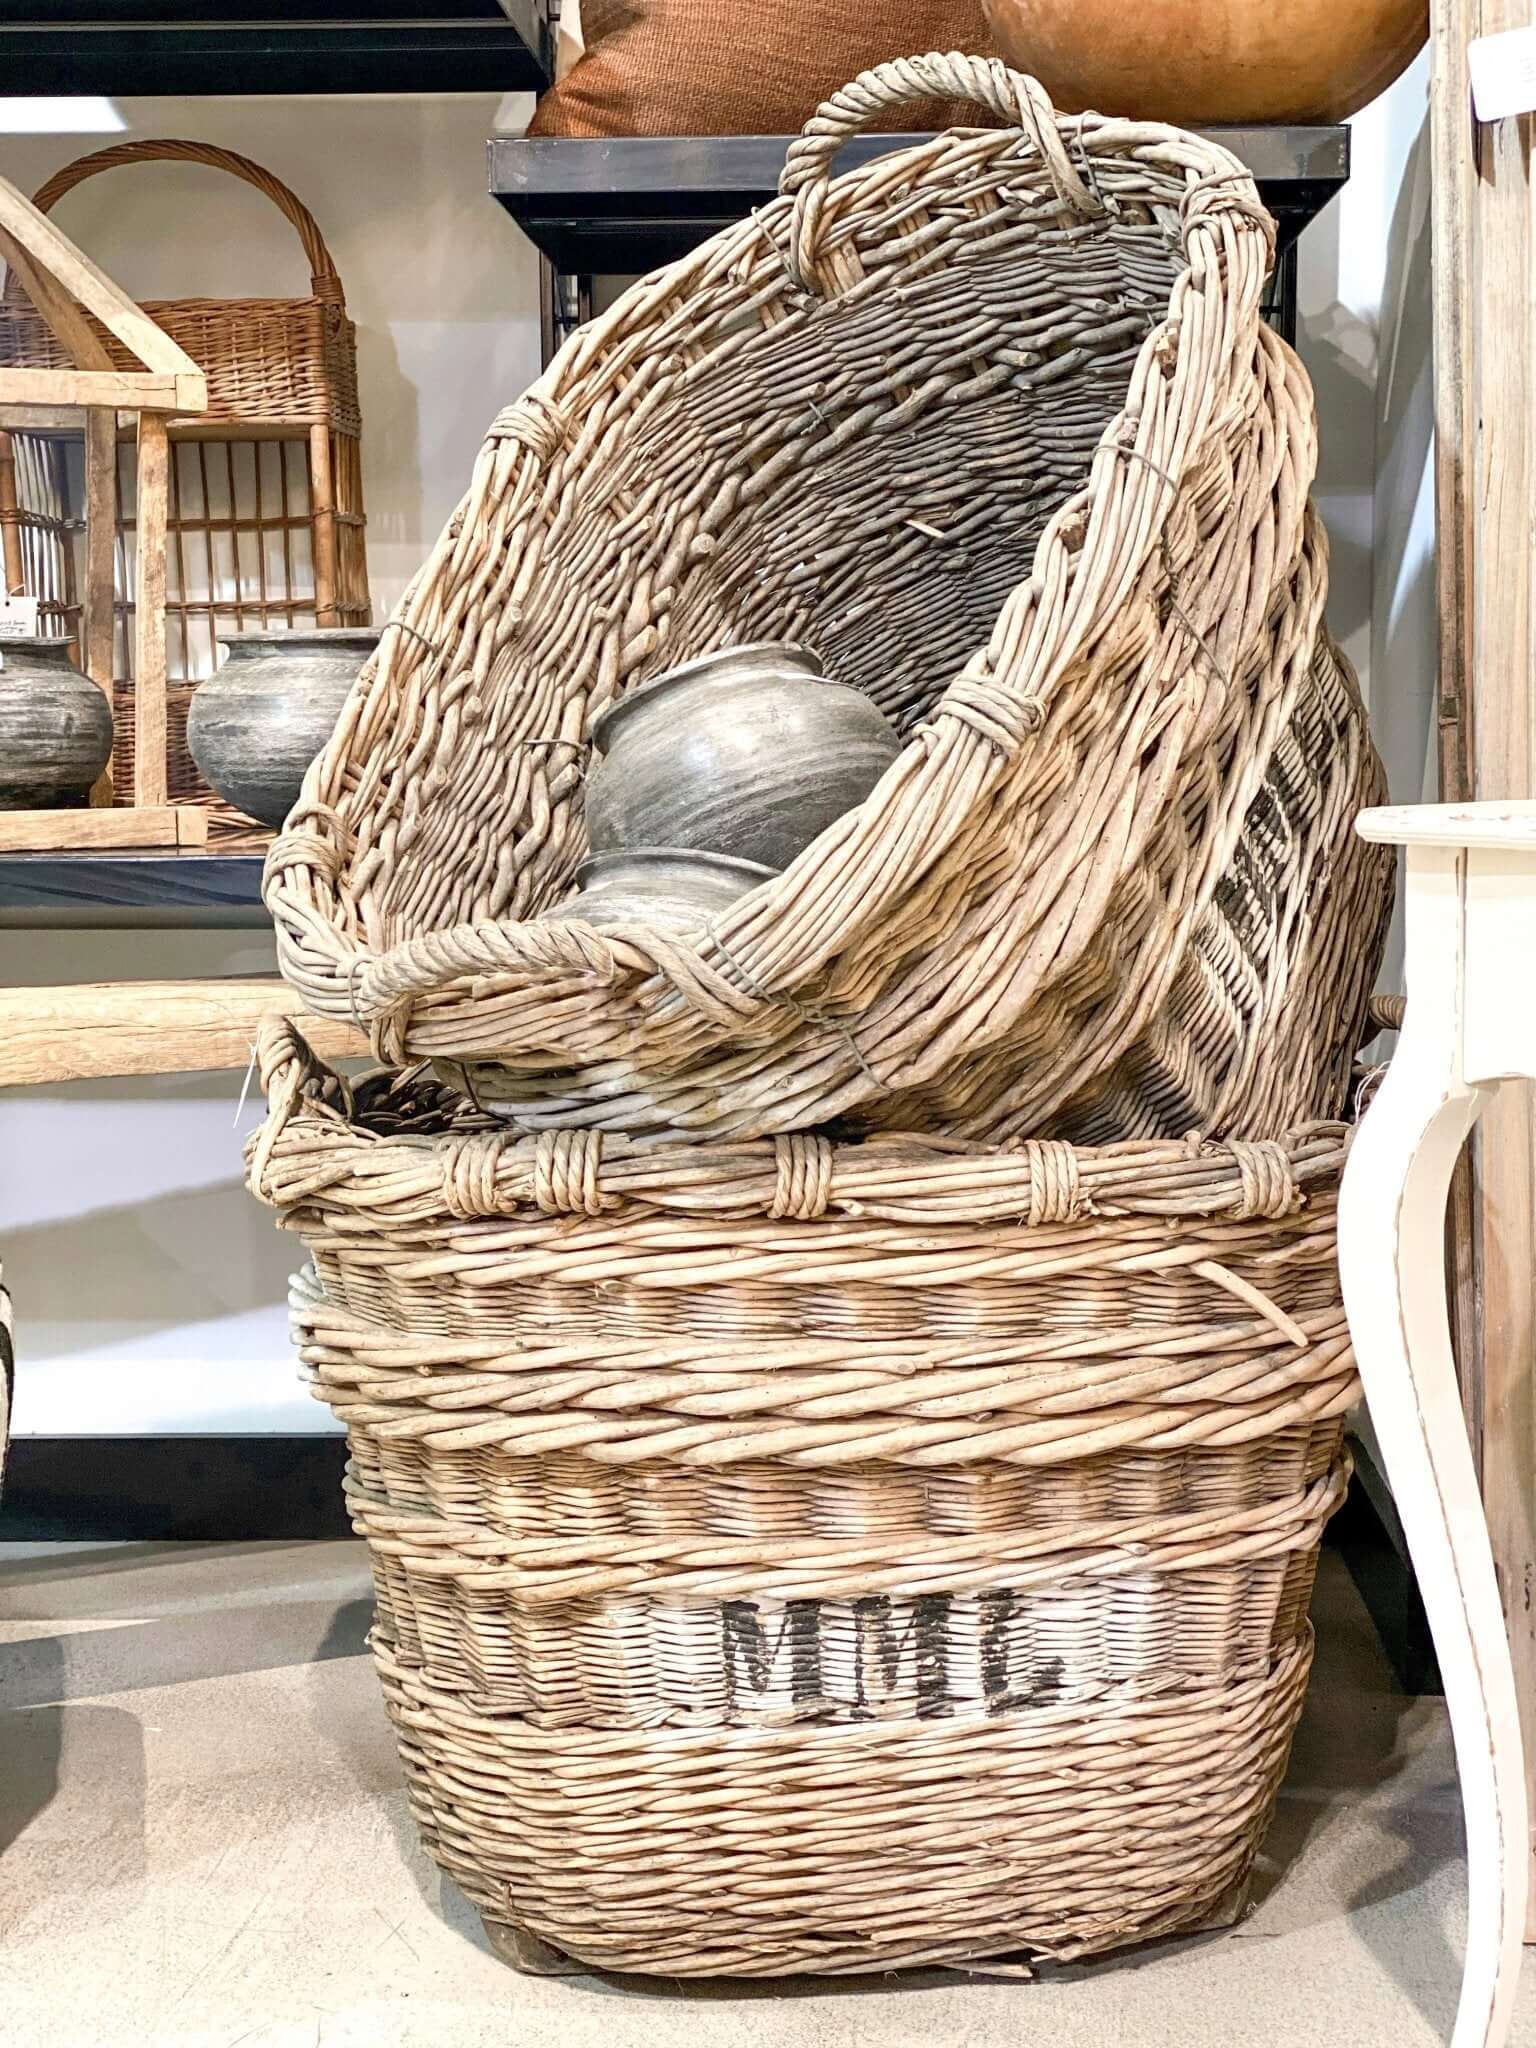 Baskets: Hand Selected Vintage and Antique Baskets, Brass and Wire Baskets, French Baskets  - Debra Hall Lifestyle